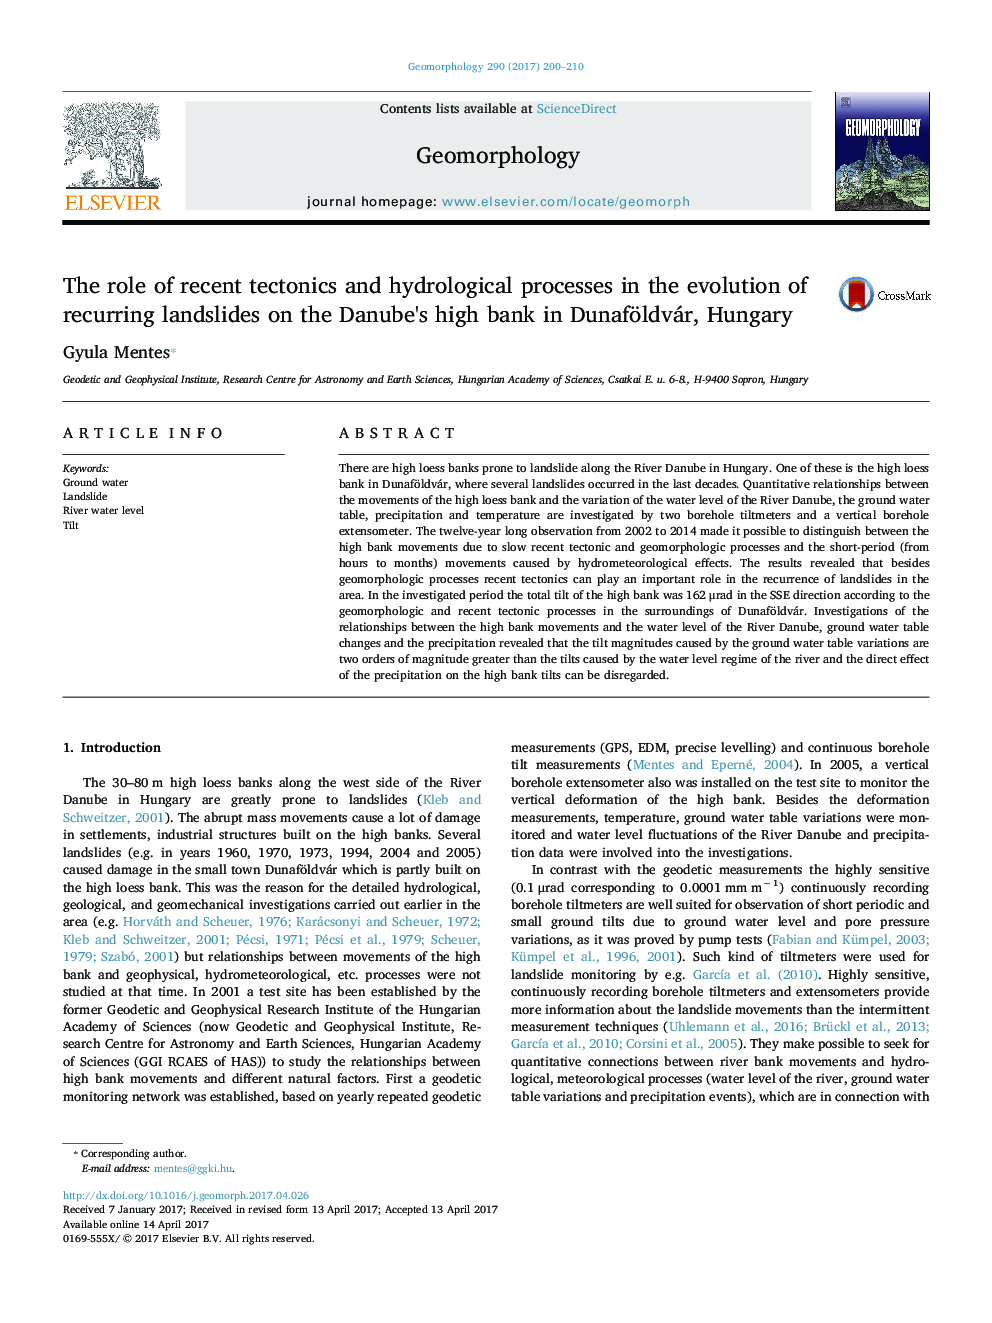 The role of recent tectonics and hydrological processes in the evolution of recurring landslides on the Danube's high bank in Dunaföldvár, Hungary